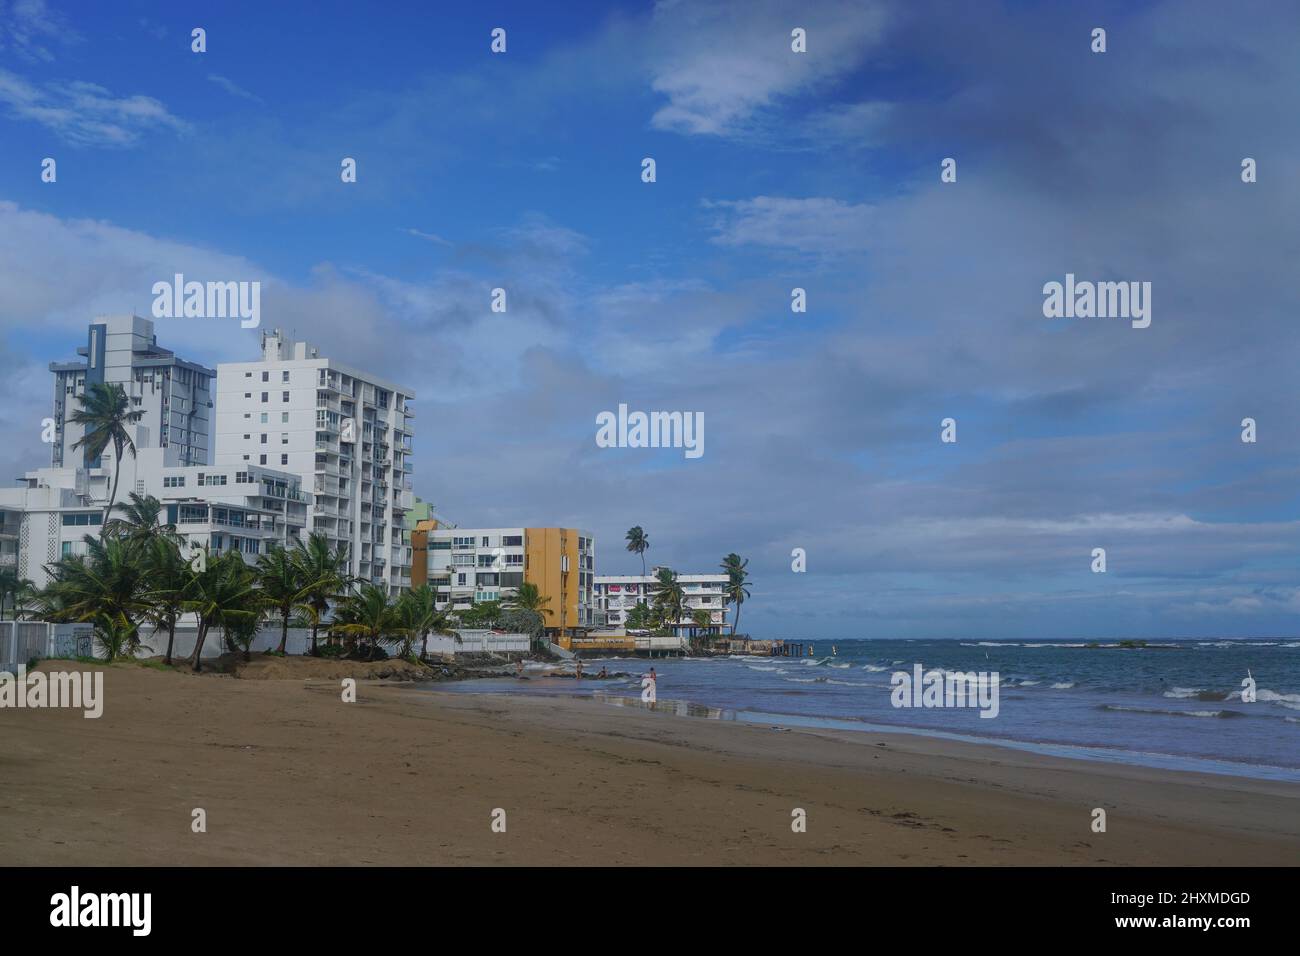 Isla Verde Beach, Puerto Rico, USA: Palm trees and hotels on a beach in Puerto Rico. Stock Photo